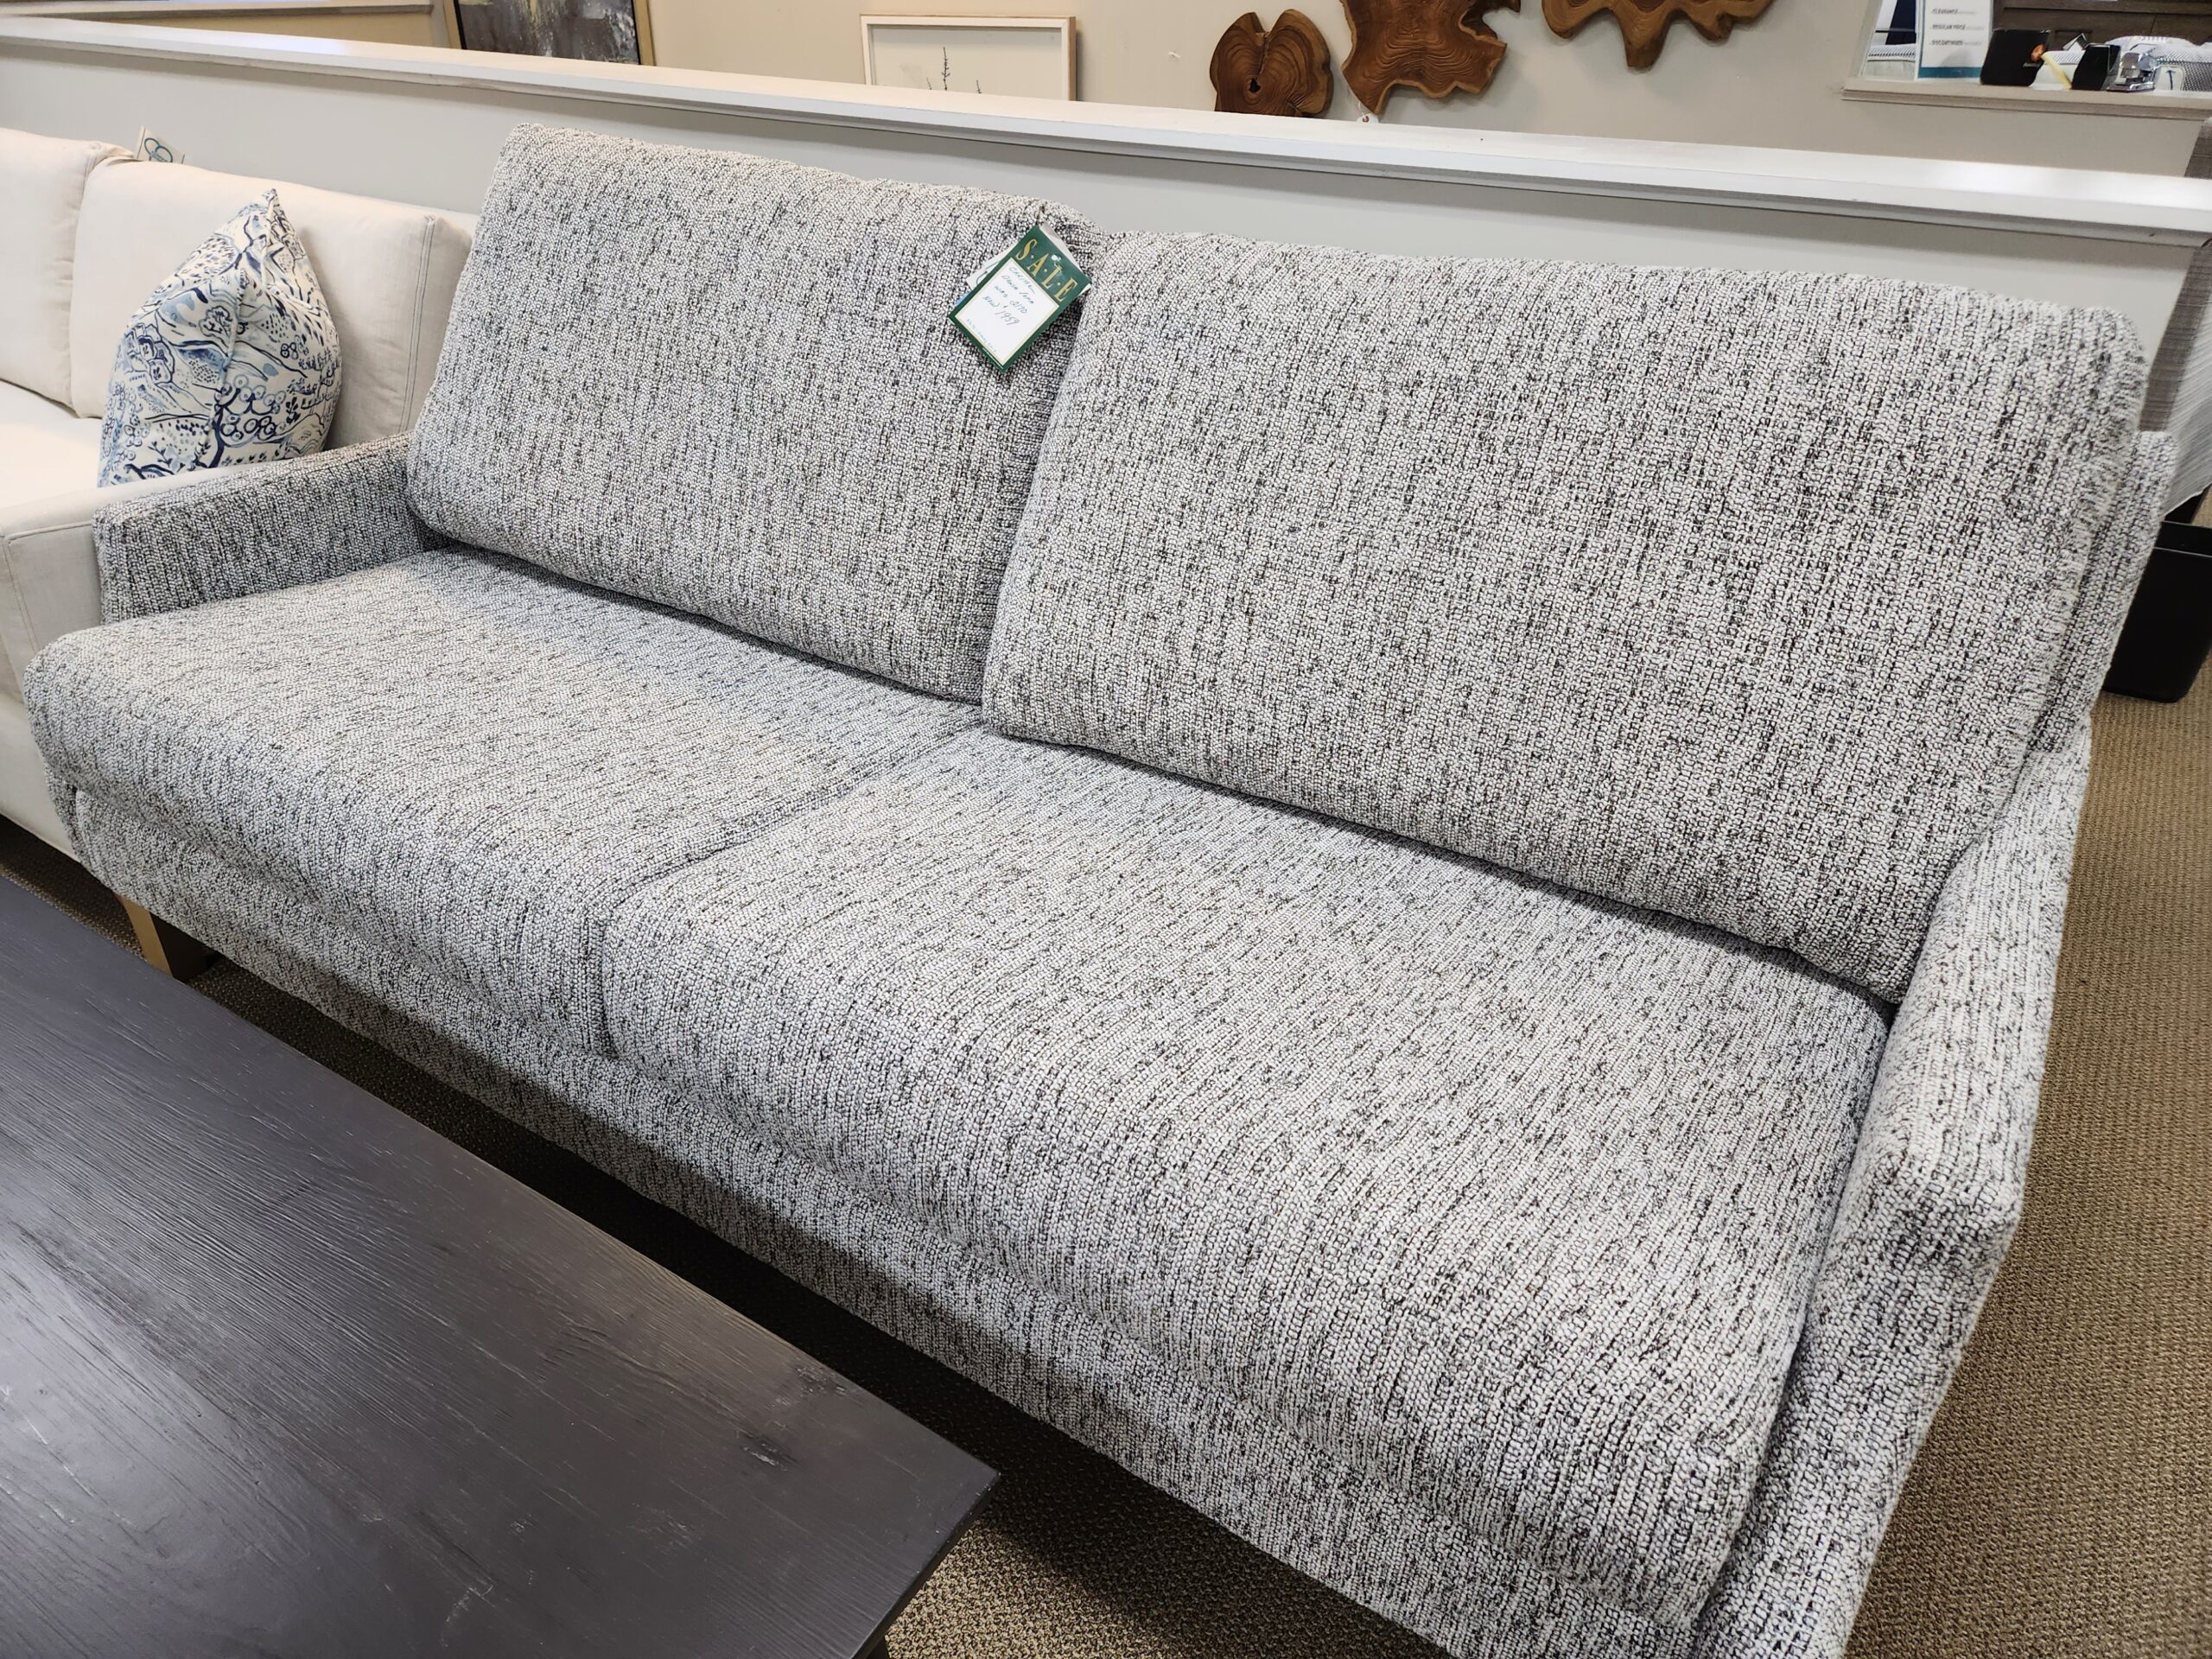 a couch and table in a store